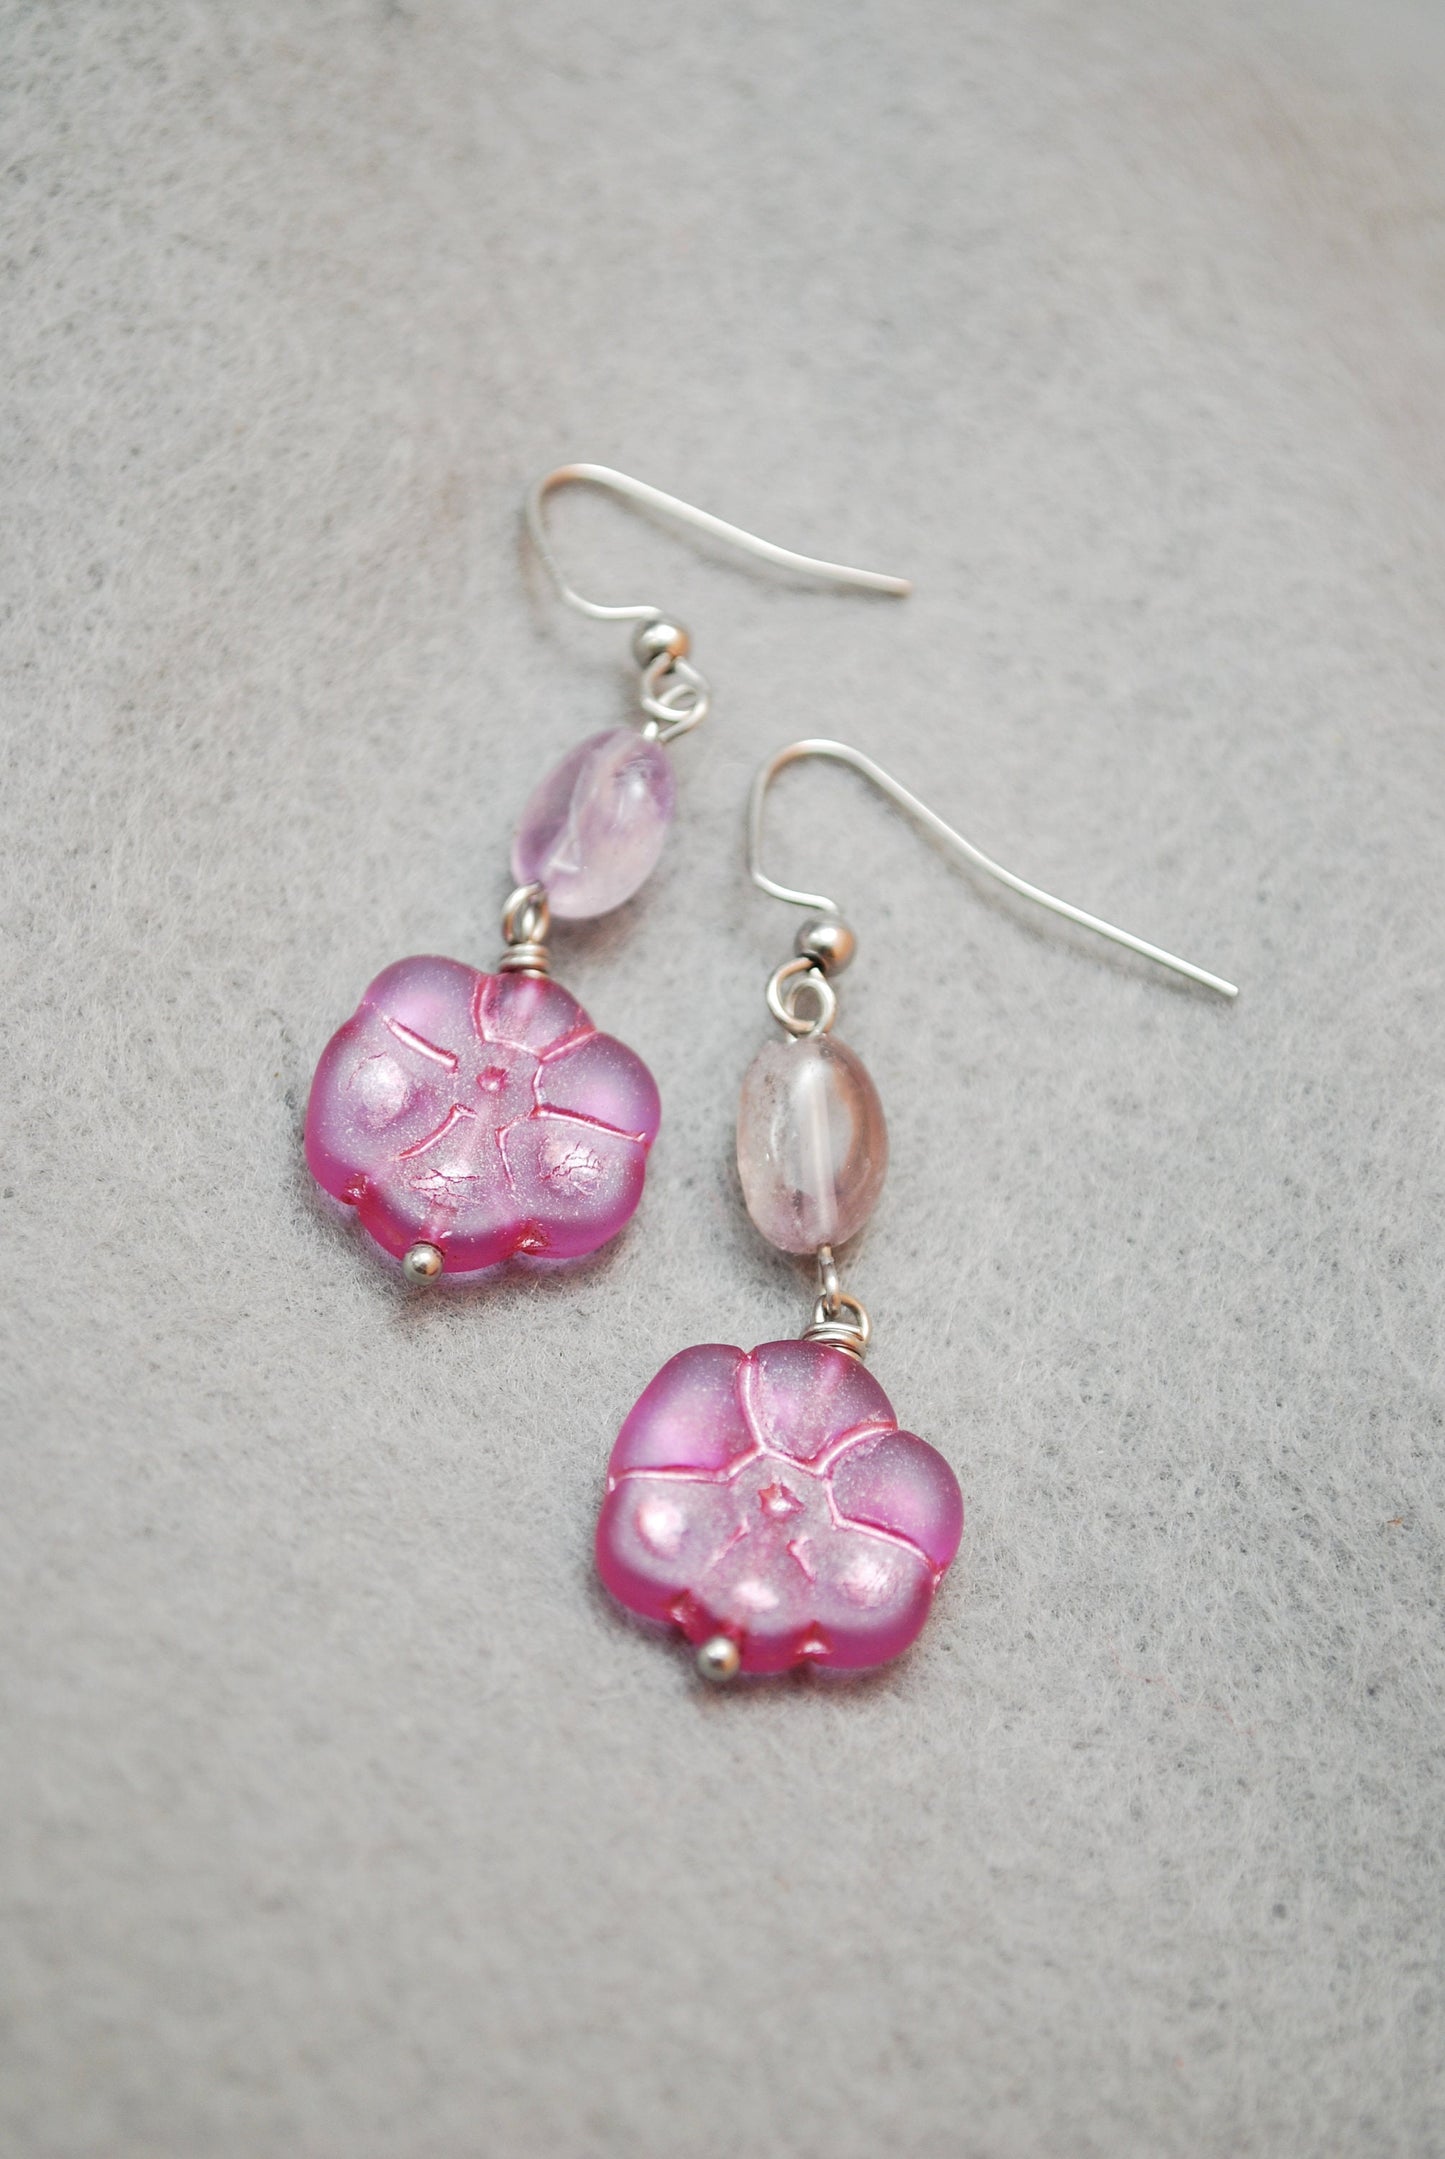 Chic and Playful: Czech Glass Flower Earrings for Fashion Enthusiasts. Estibela design. 5cm - 2"